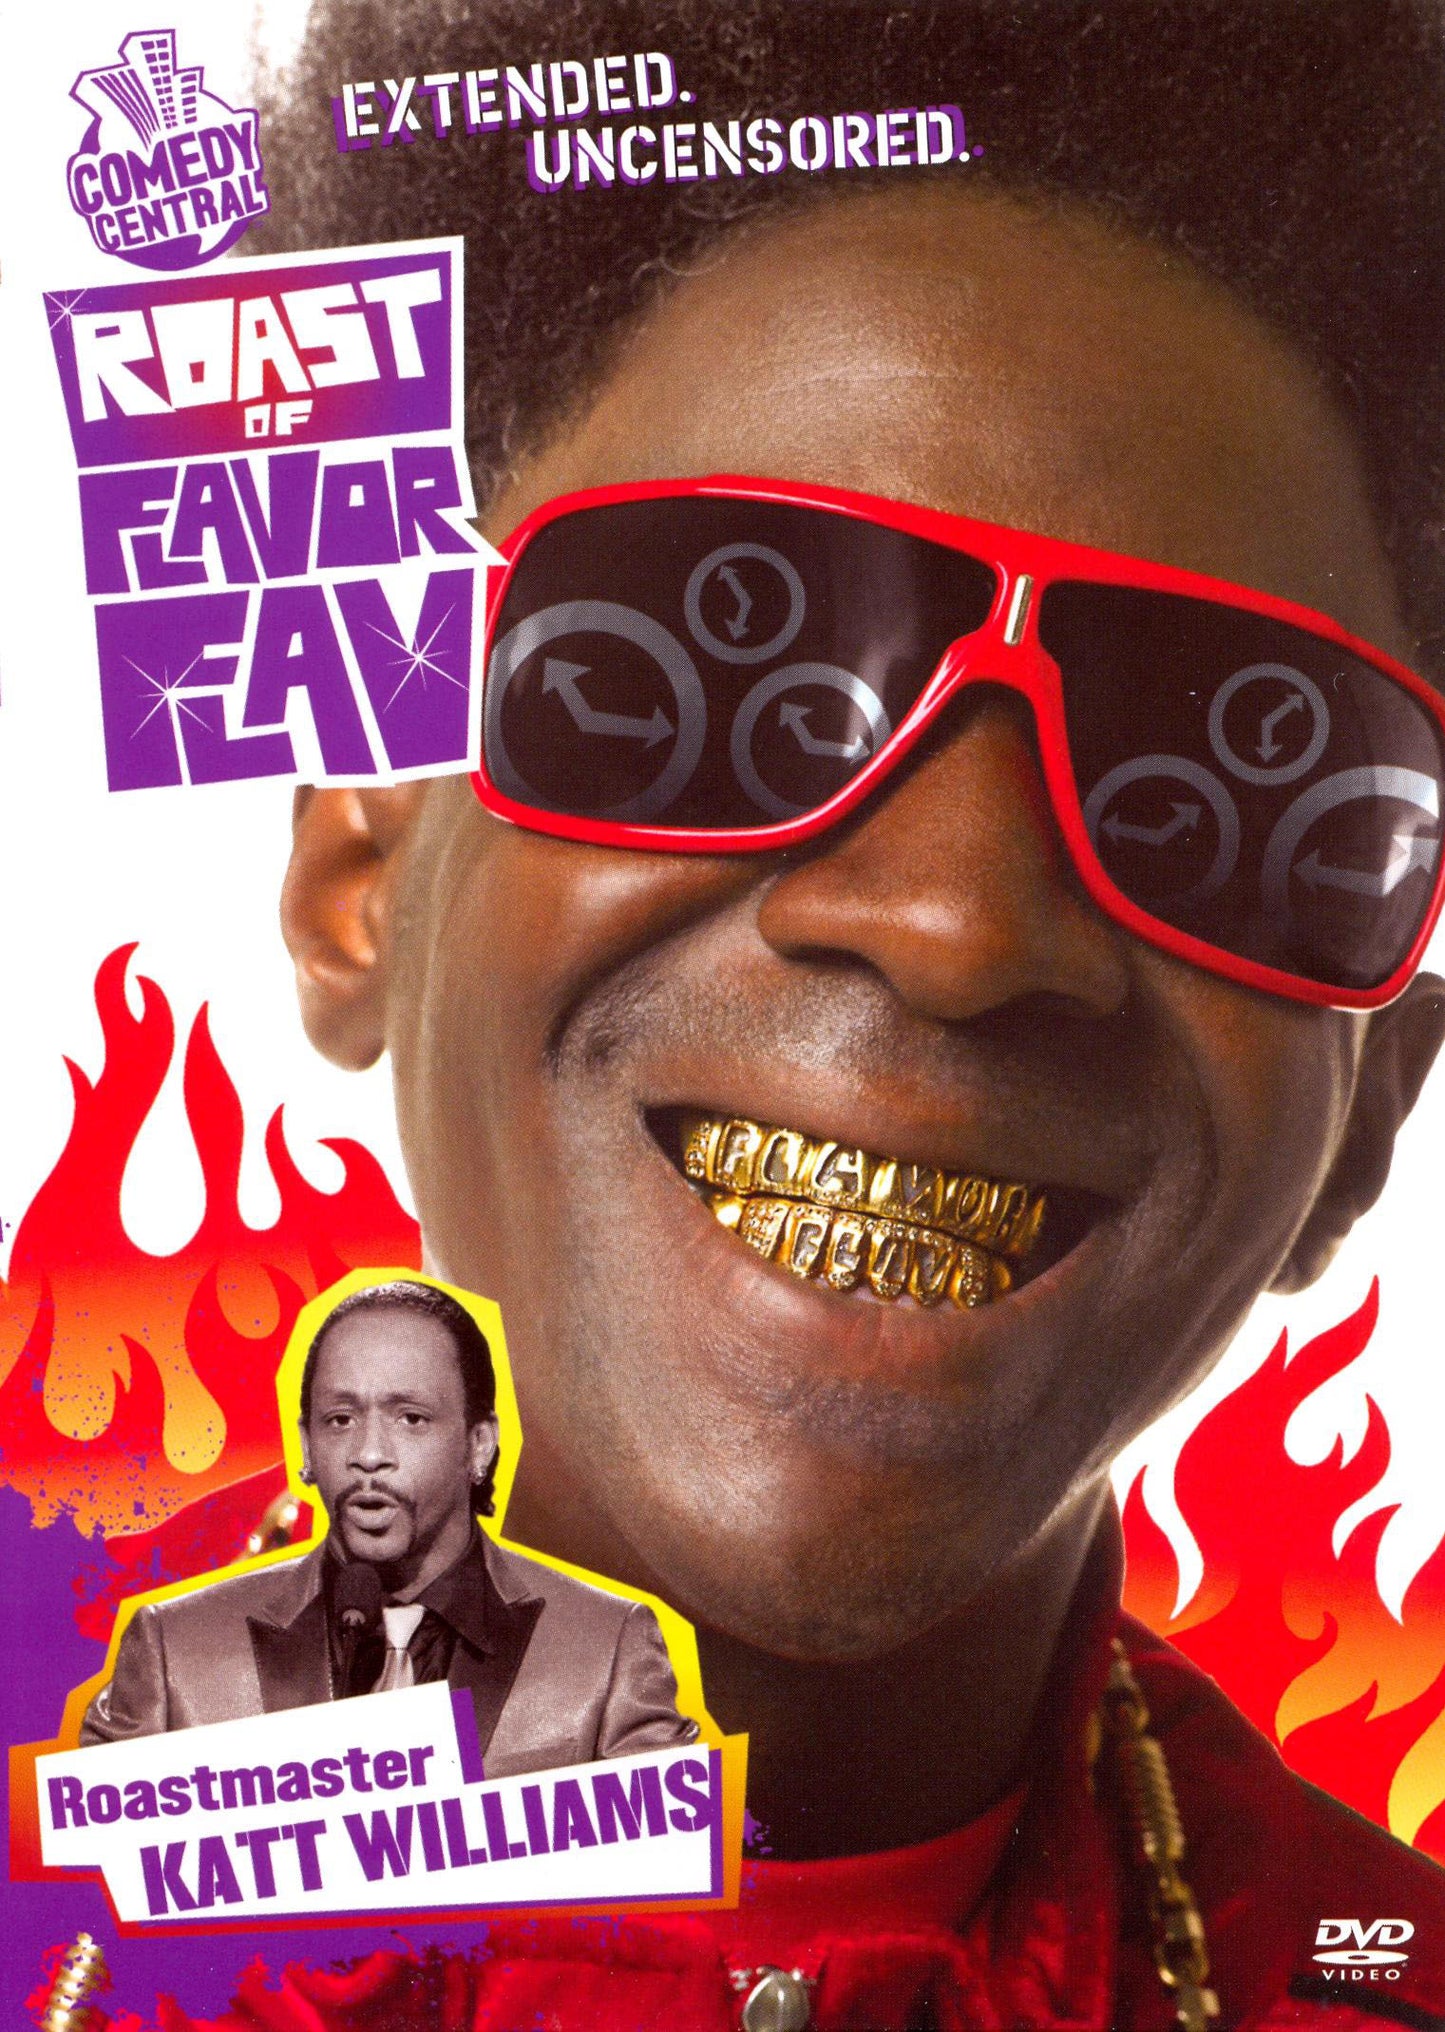 Comedy Central Roast of Flavor Flav: Extended and Uncensored cover art